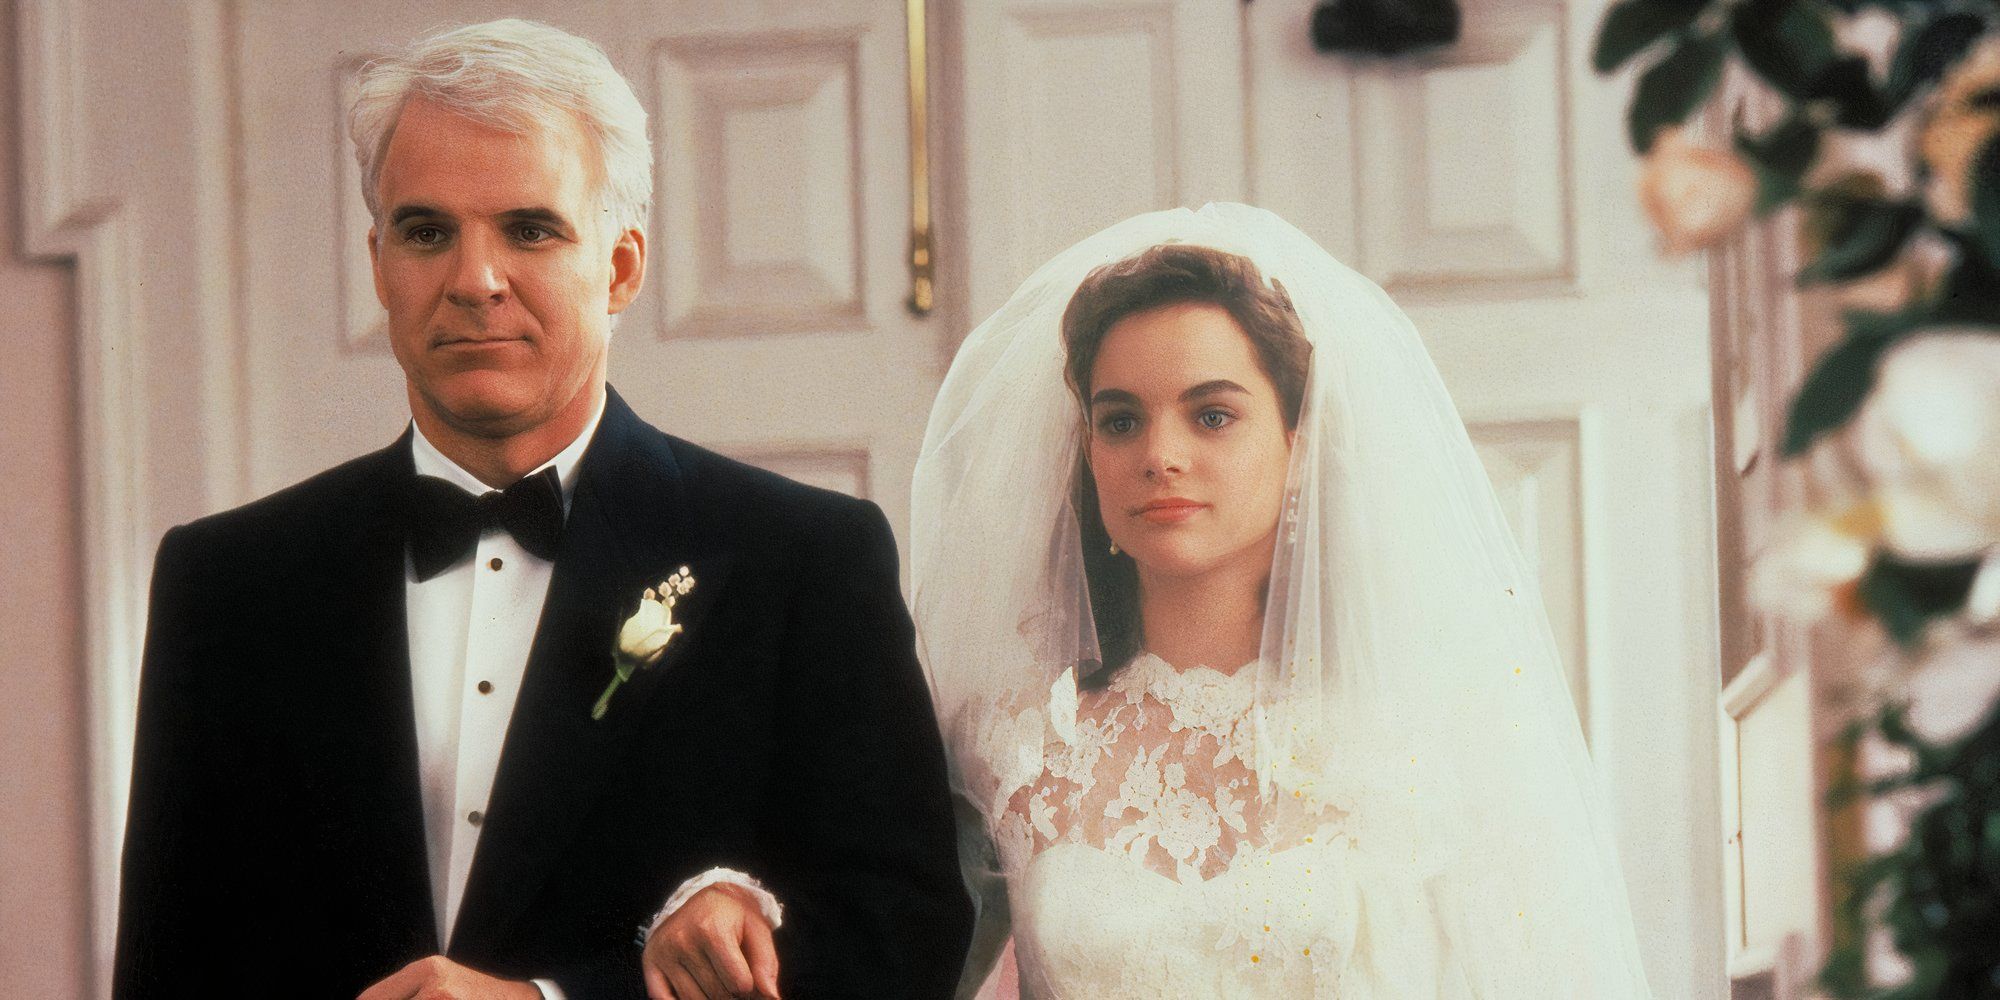 Steve Martin as George Banks and Kimberly Williams-Paisley as Annie Banks in Father of the Bride walking together down the aisle at her wedding.